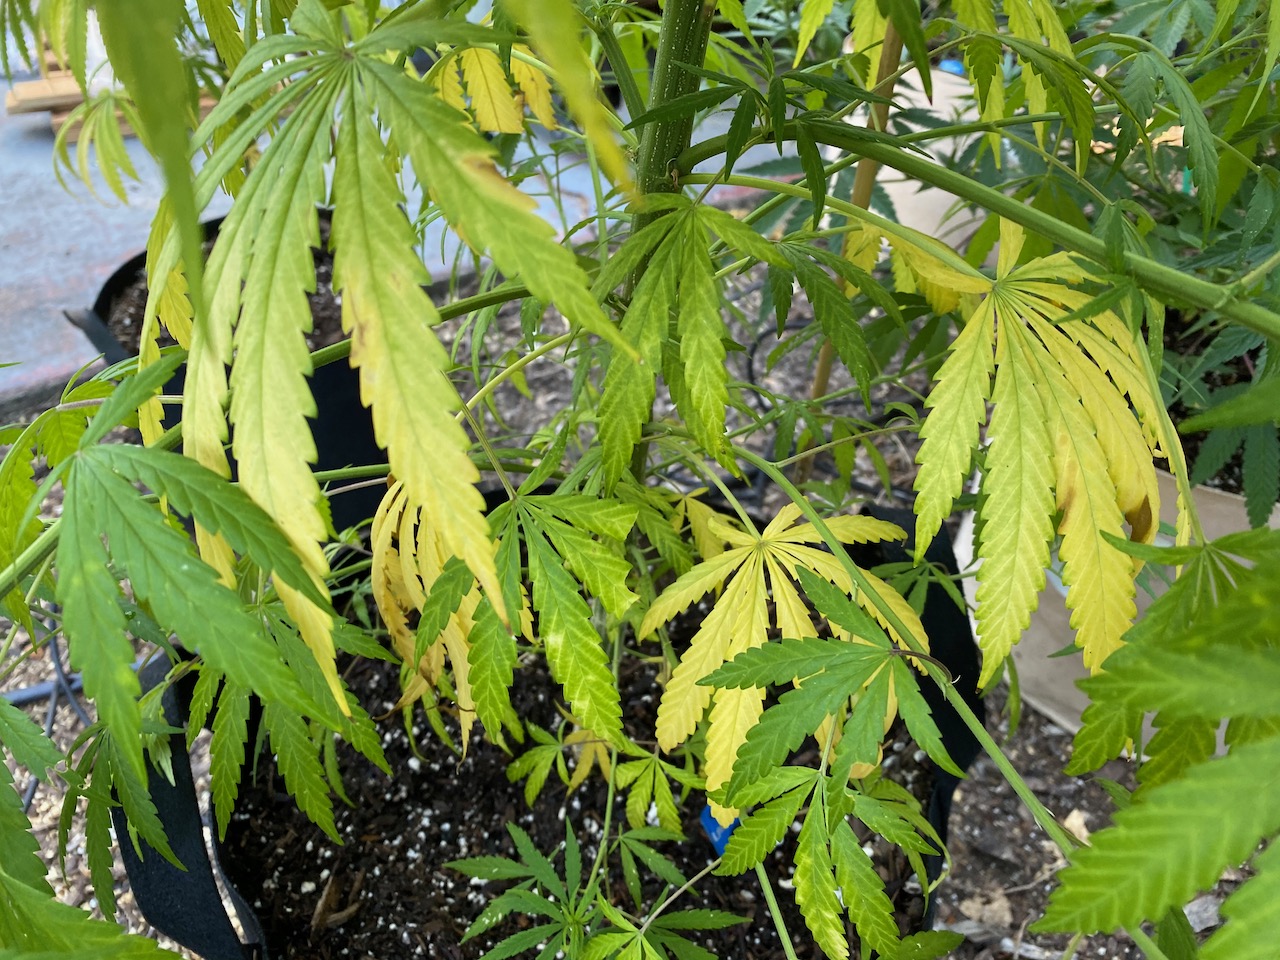 Leaves yellowing some spotting nutrient deficiency or 2